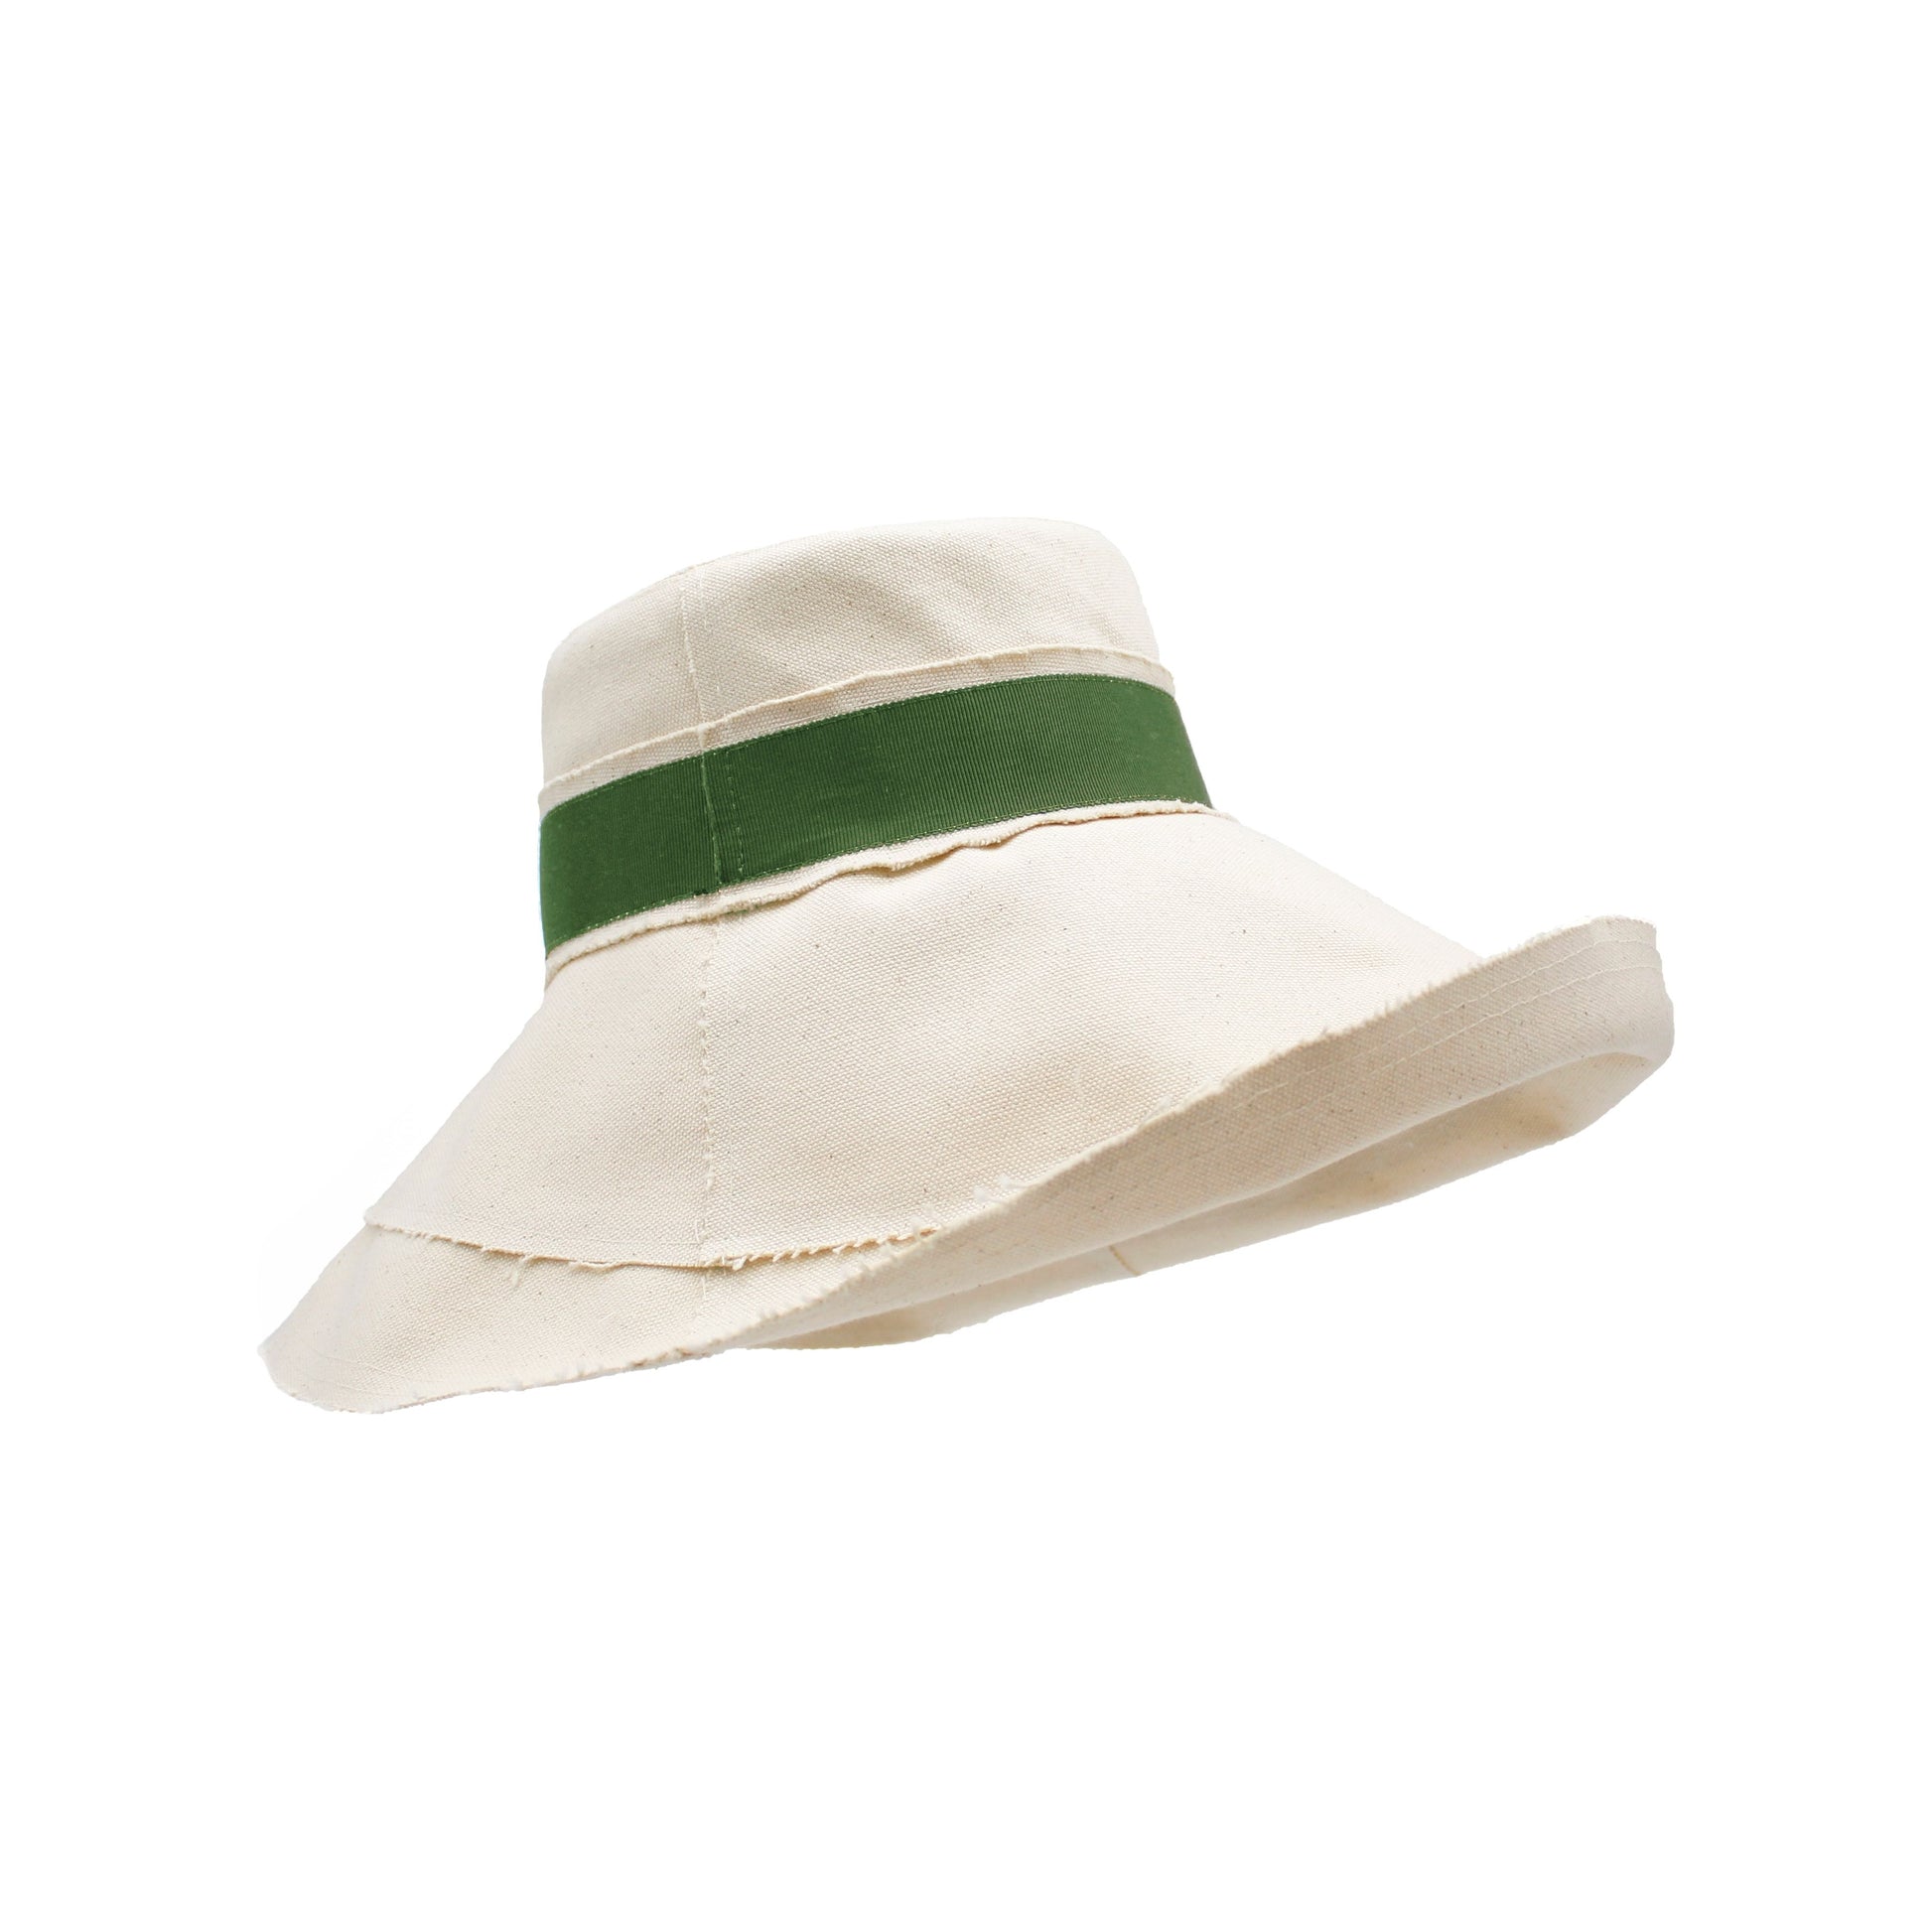 A beige wide-brimmed hat with a green band around the base of the crown, perfect for sun protection and flexible packing, is the Dia, Natural / Grass from Lola Hats.